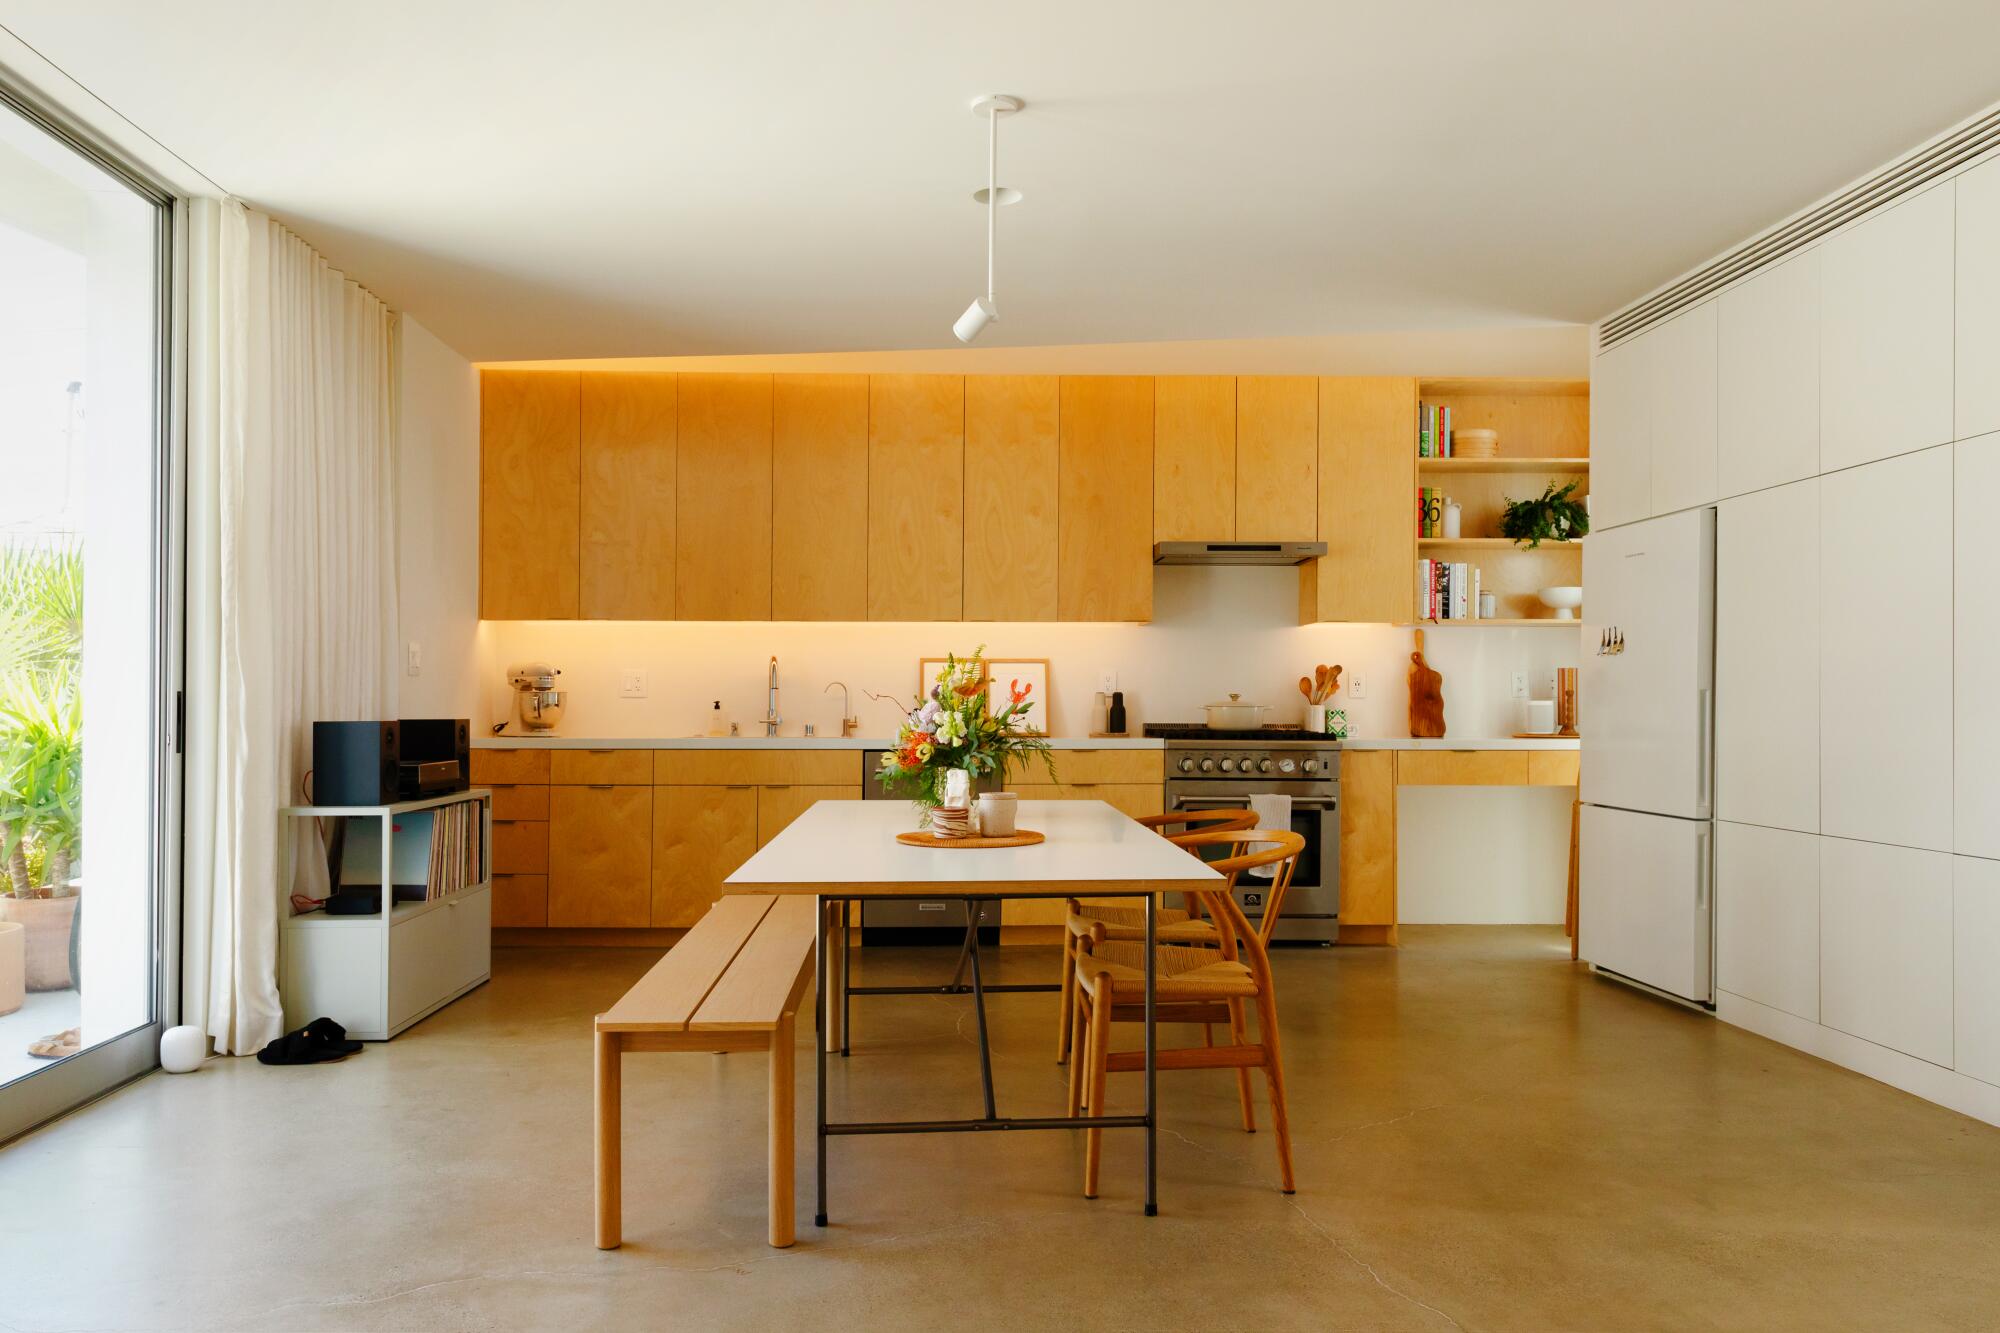 A full-size kitchen with custom birch cabinets, a dining table and polished concrete floors.